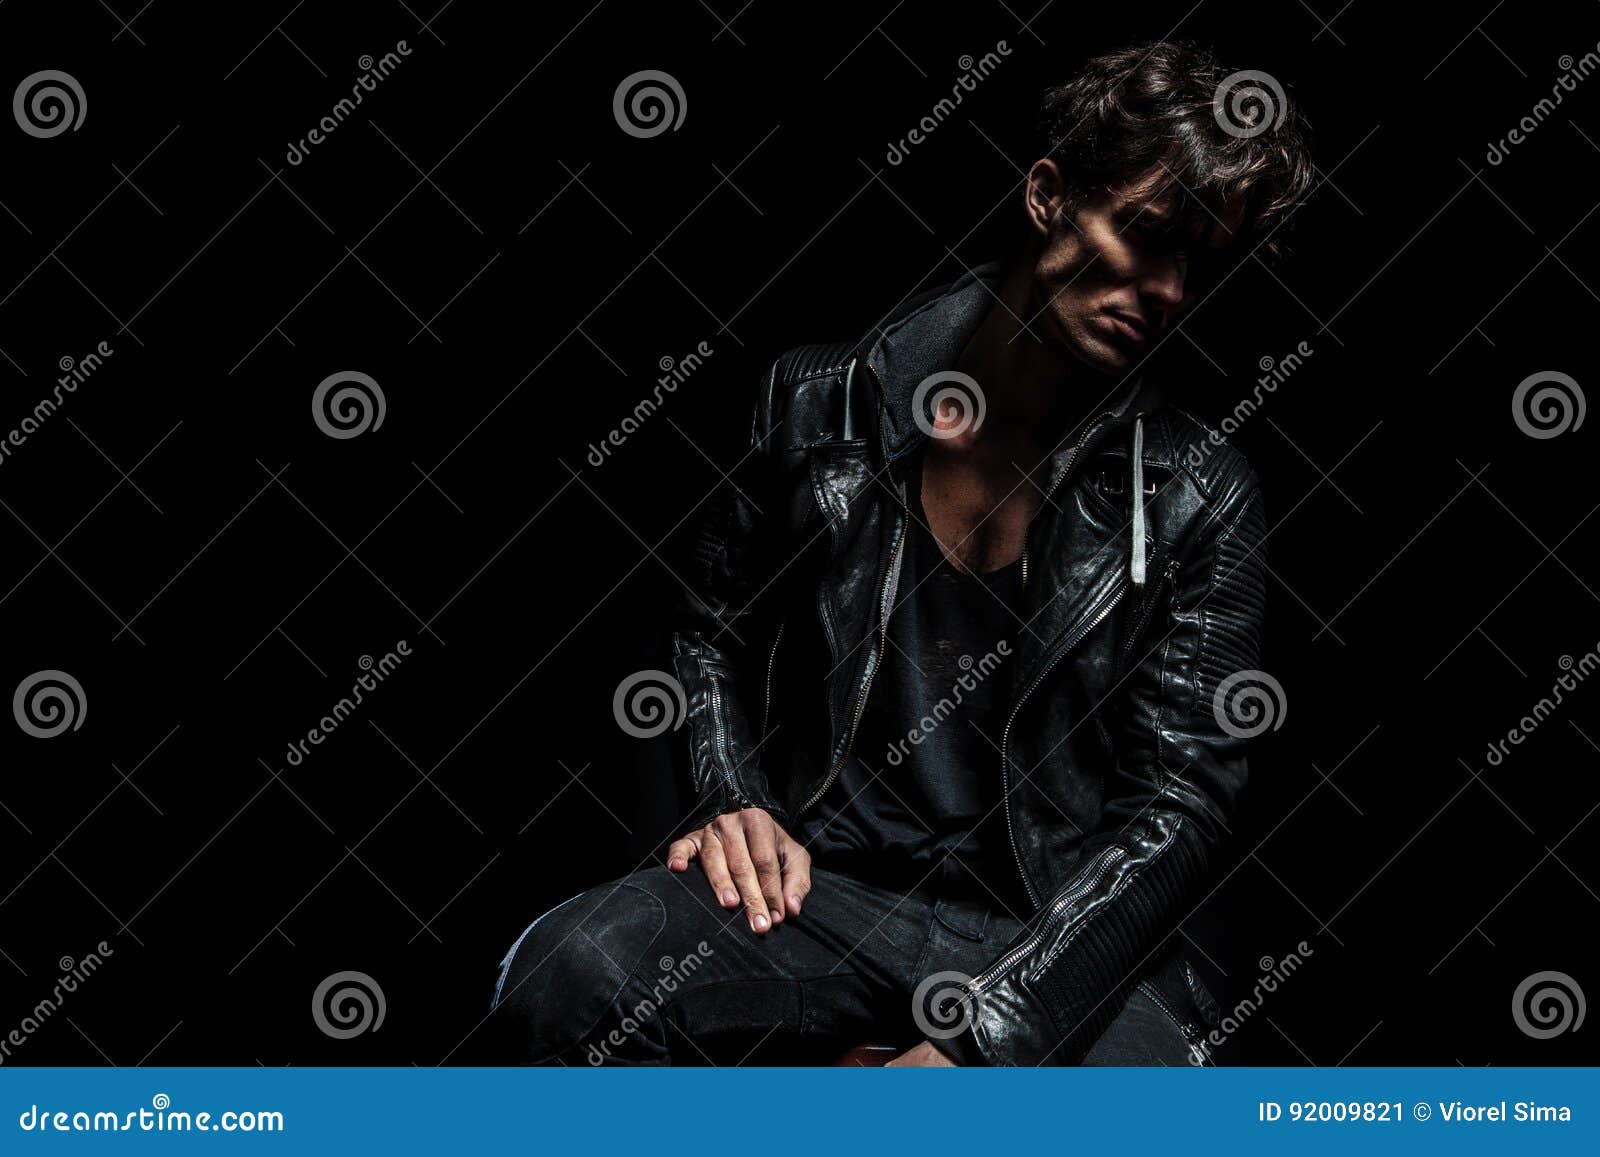 Seated Fashion Model Wearing Leather Jacket and Looking Away Stock ...